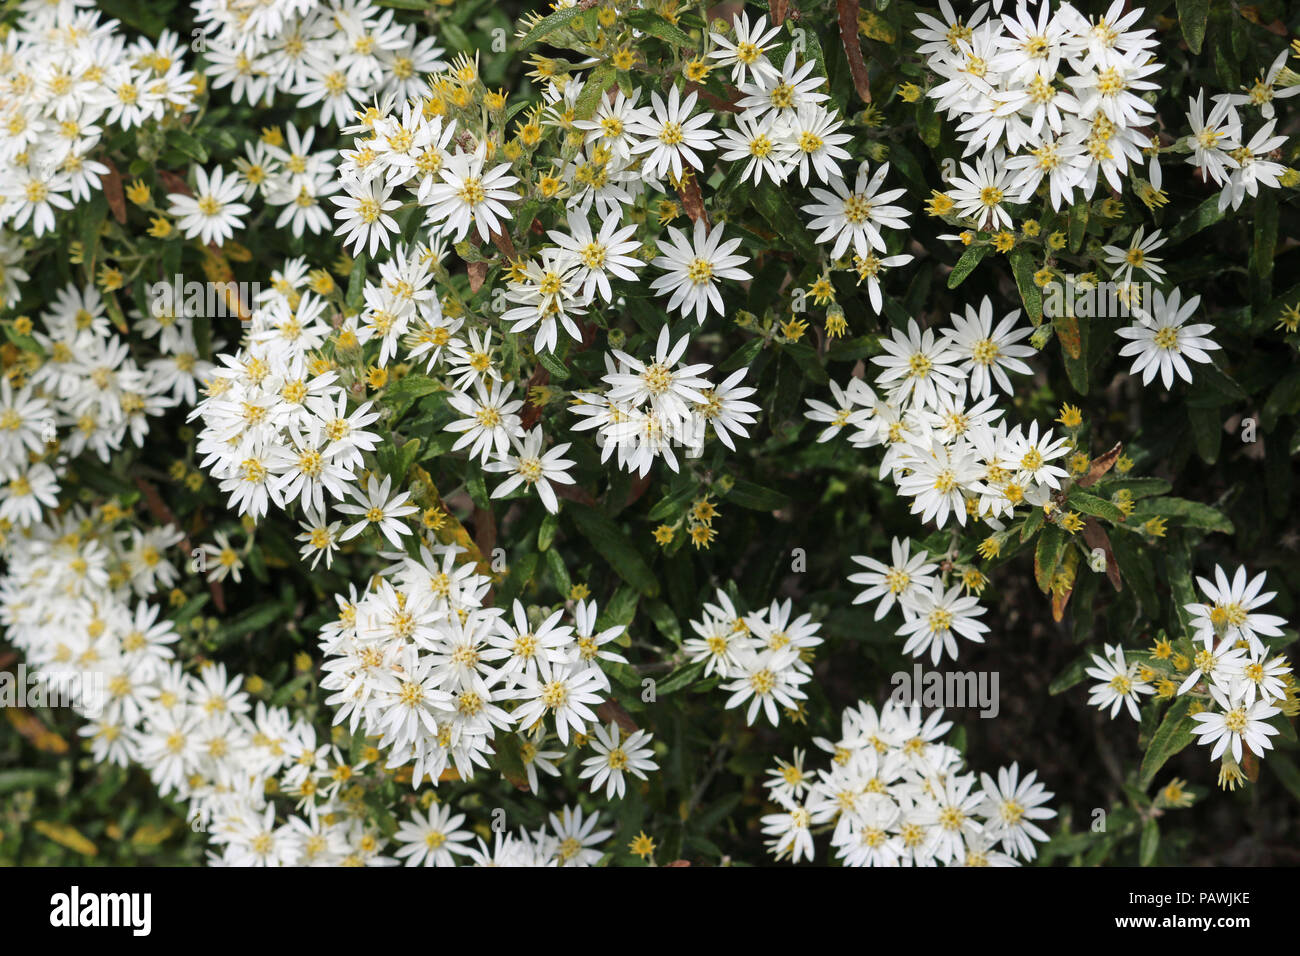 Scilly daisy bush (Olearia x scilloniensis) in full flower with a background of leaves of the same plant. Stock Photo